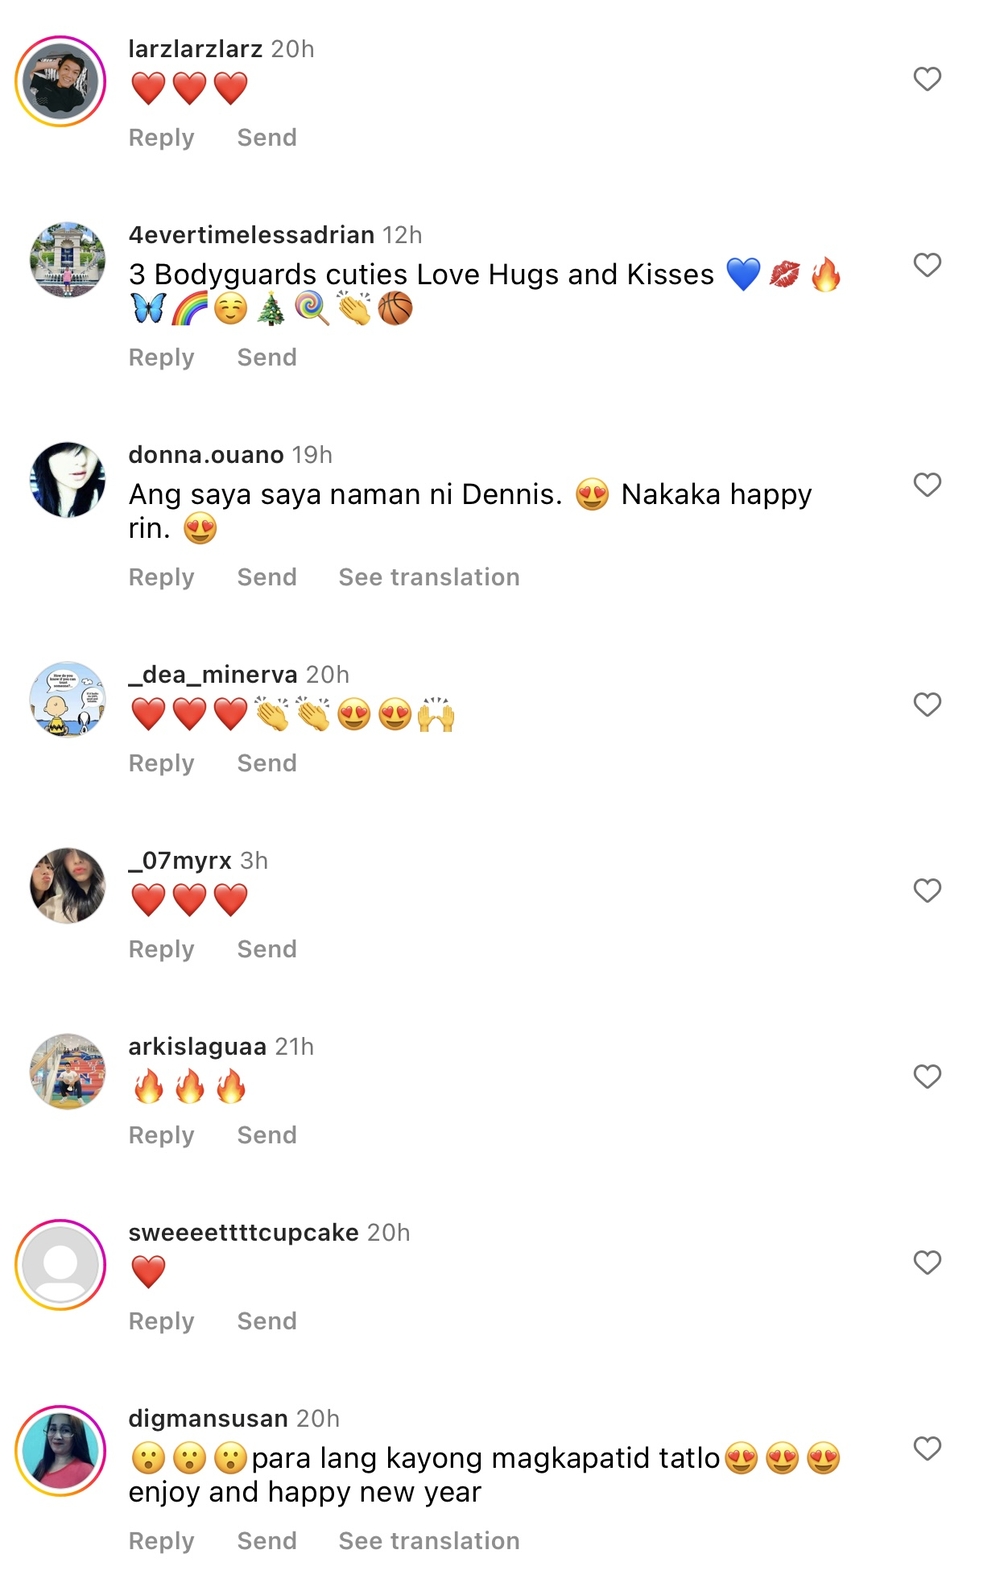 Netizens react to the post of Dennis Trillo